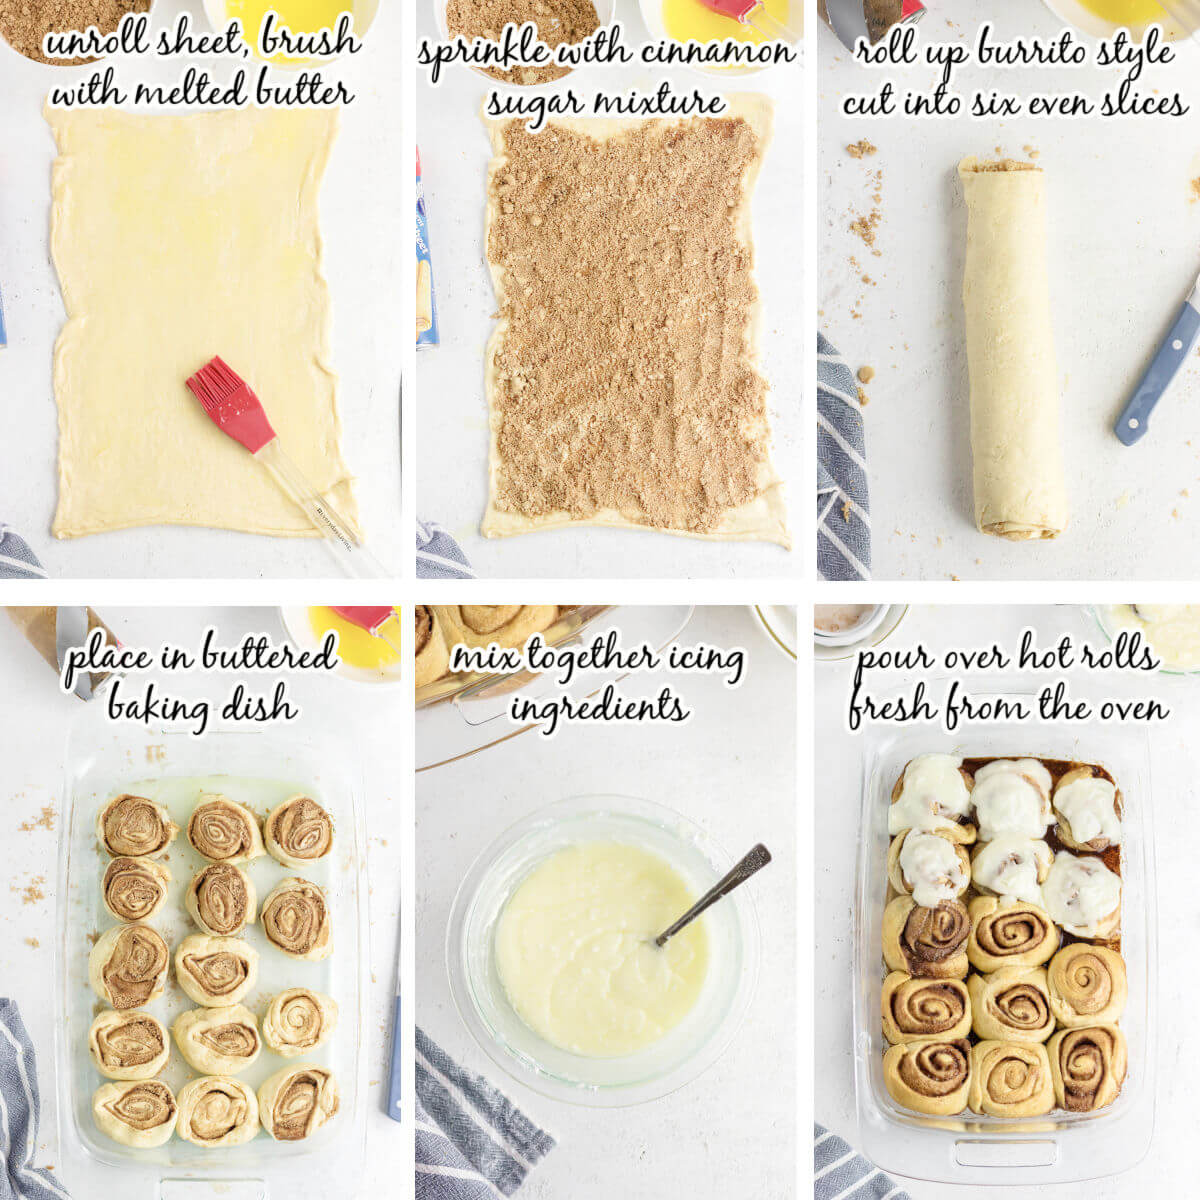 Step by step instructions to make Crescent Roll Cinnamon Rolls with print overlay. 